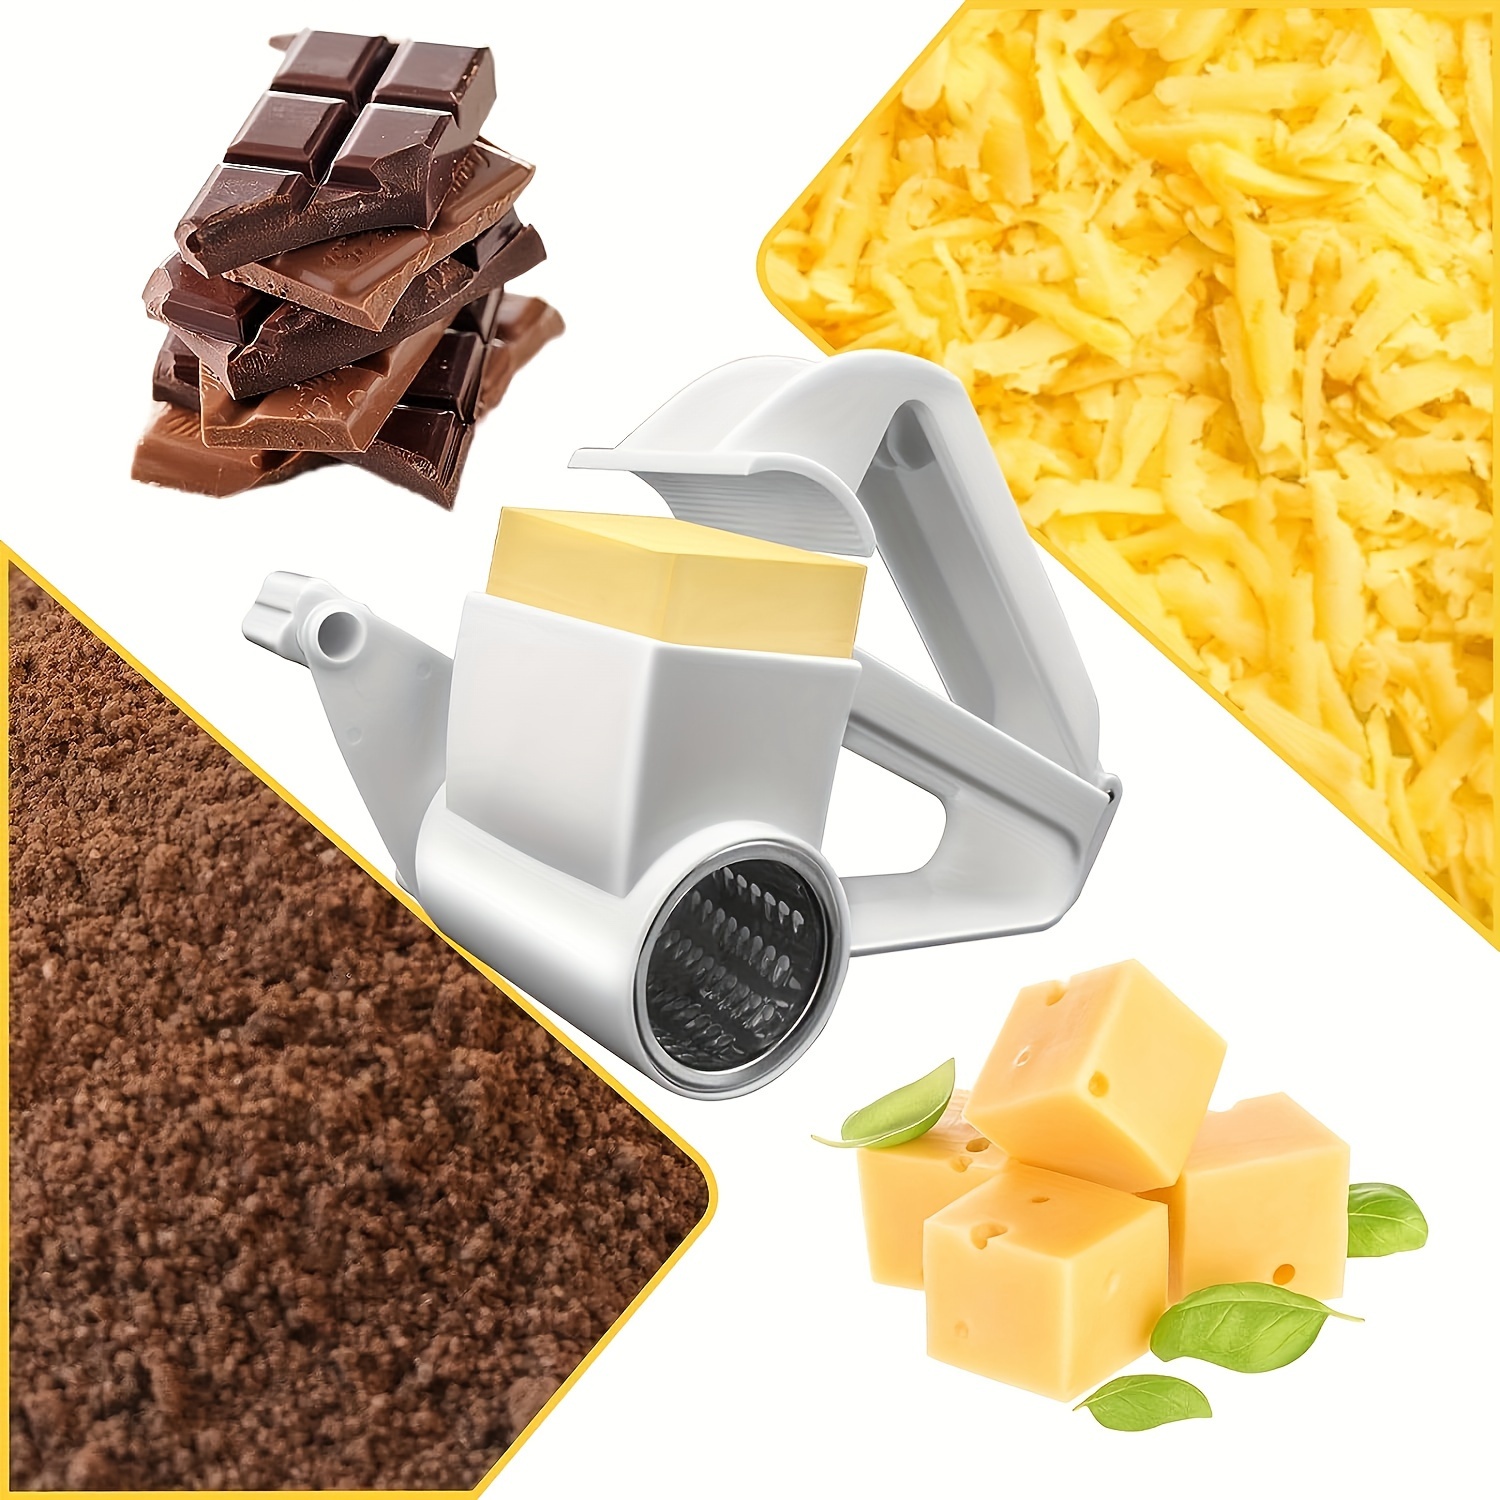 Multipurpose Rotary Cheese Grater With Stainless Steel Drums Handheld Cheese  Grinder For Parmesan Cheddar Chocolate Vegetable